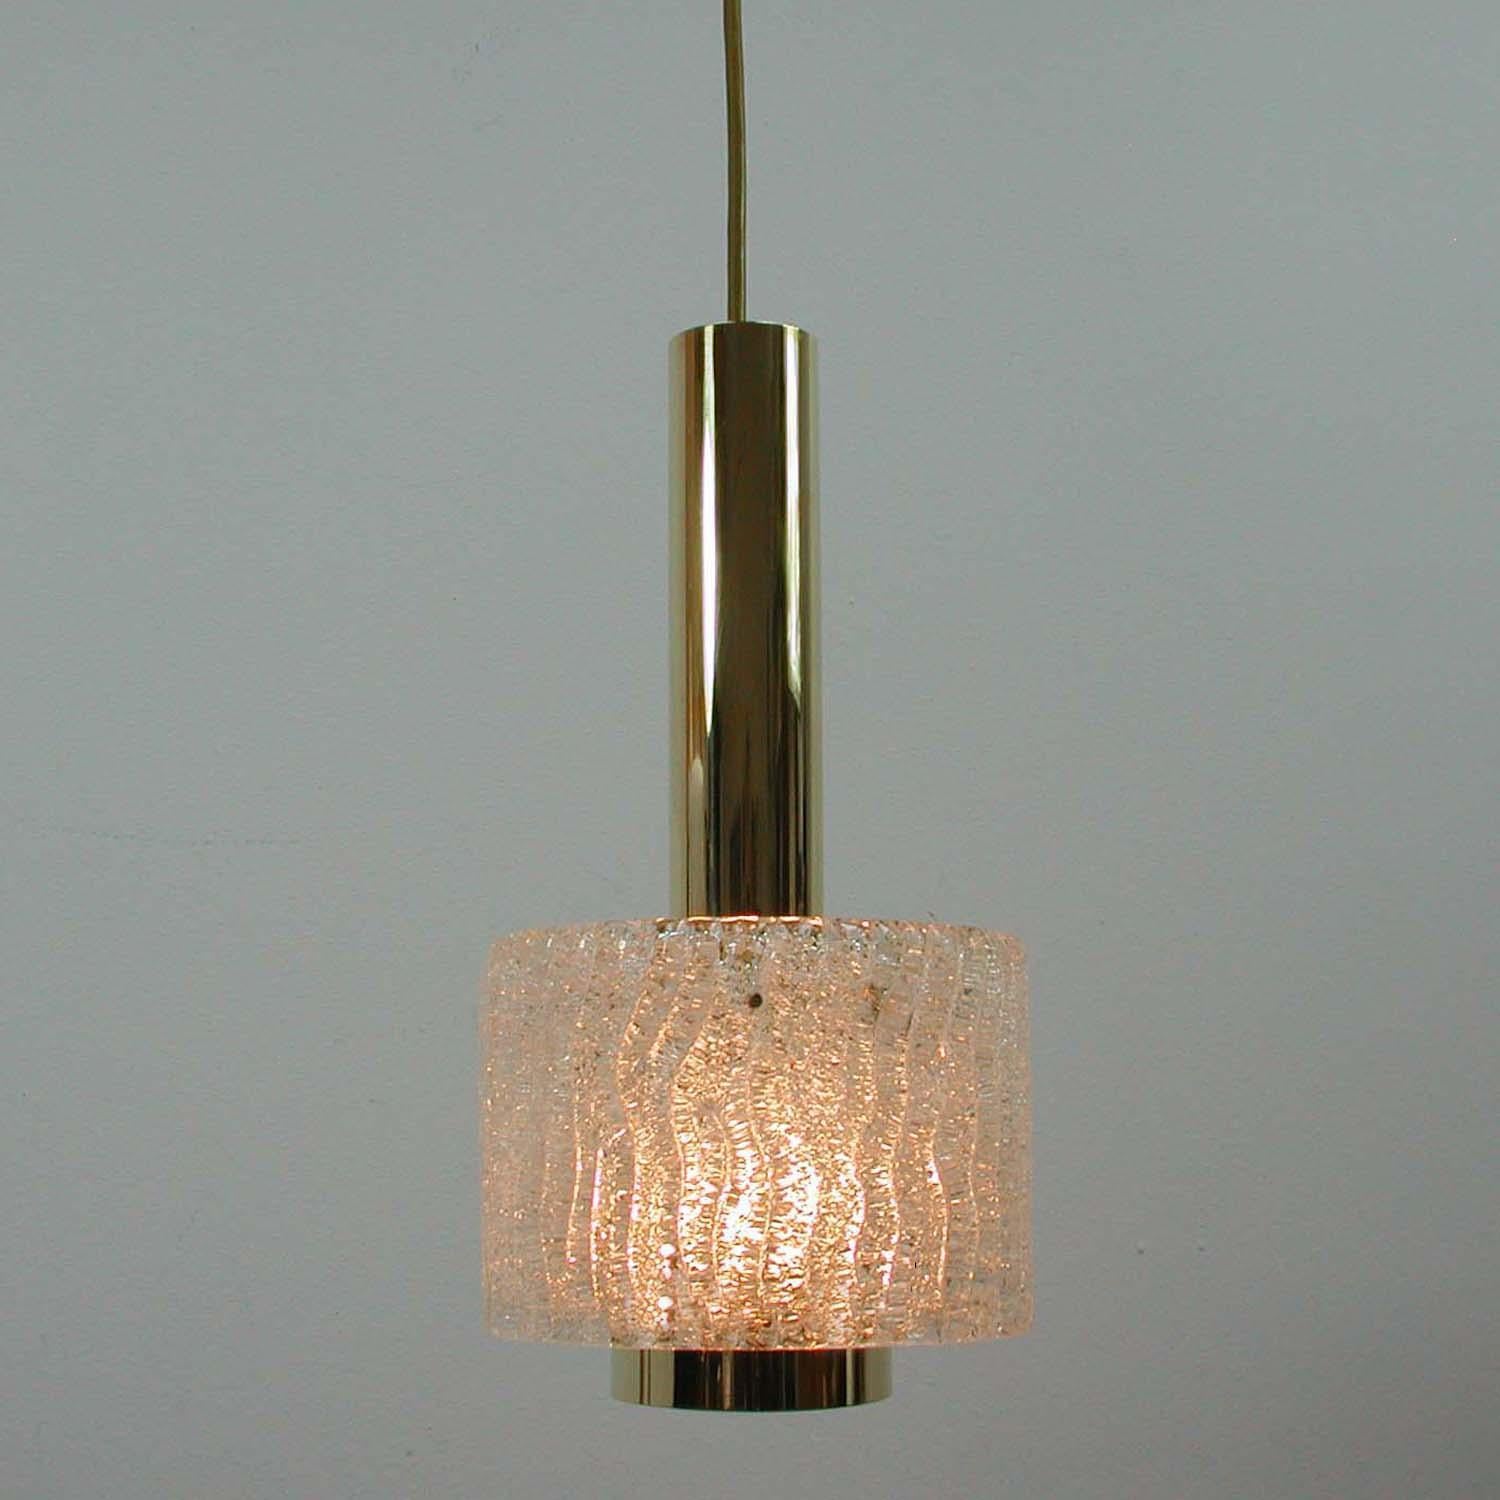 J.T. Kalmar Midcentury Textured Glass and Brass Pendant, 1950s For Sale 5